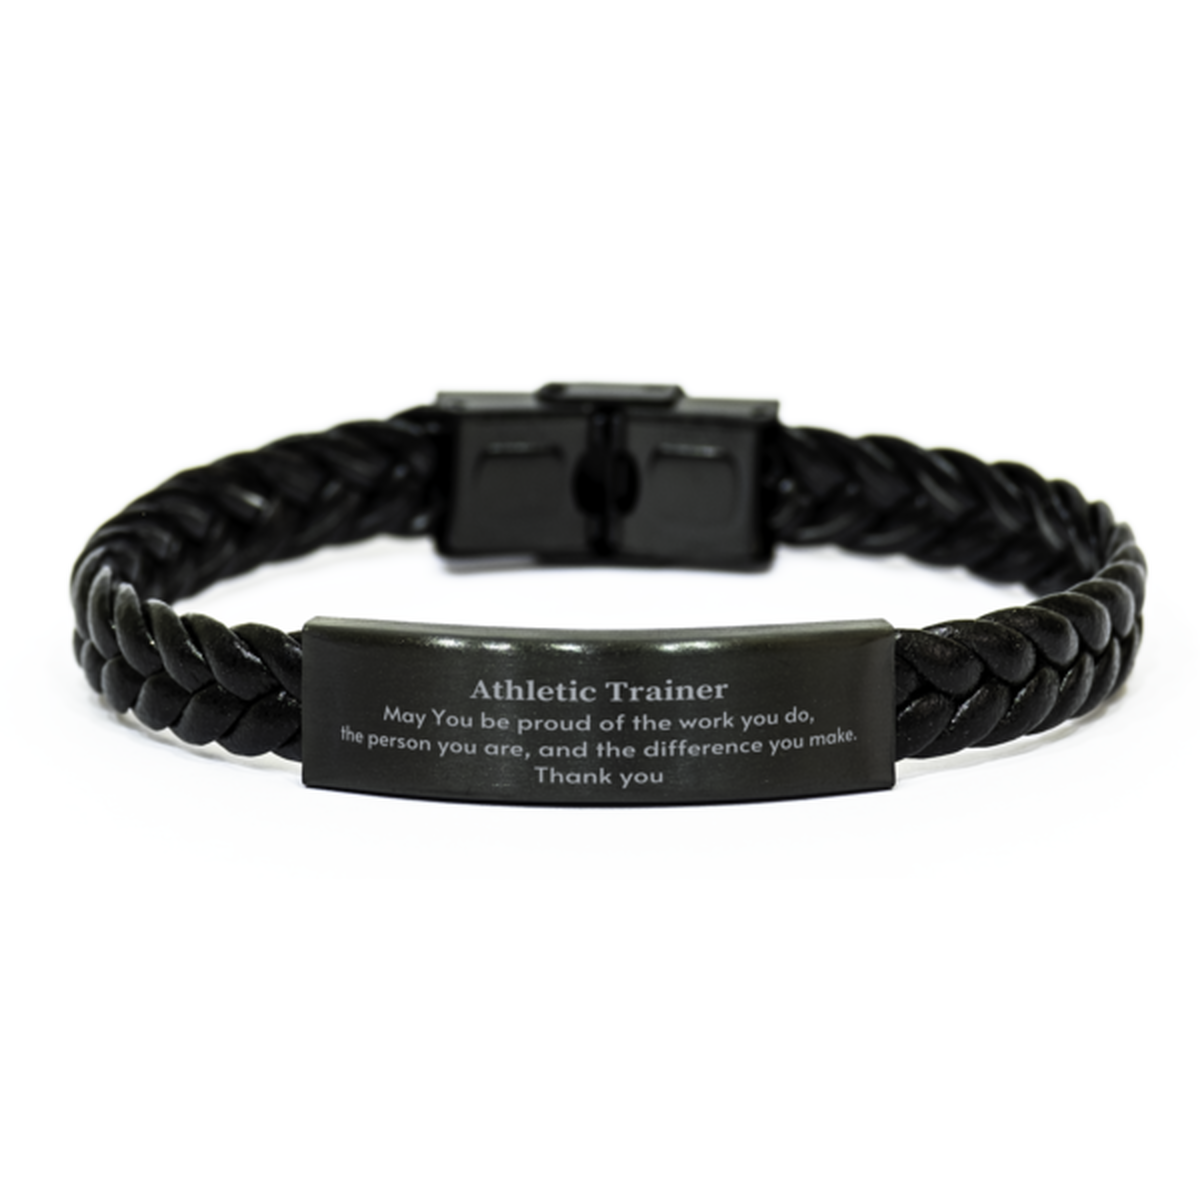 Heartwarming Braided Leather Bracelet Retirement Coworkers Gifts for Athletic Trainer, Athletic Trainer May You be proud of the work you do, the person you are Gifts for Boss Men Women Friends